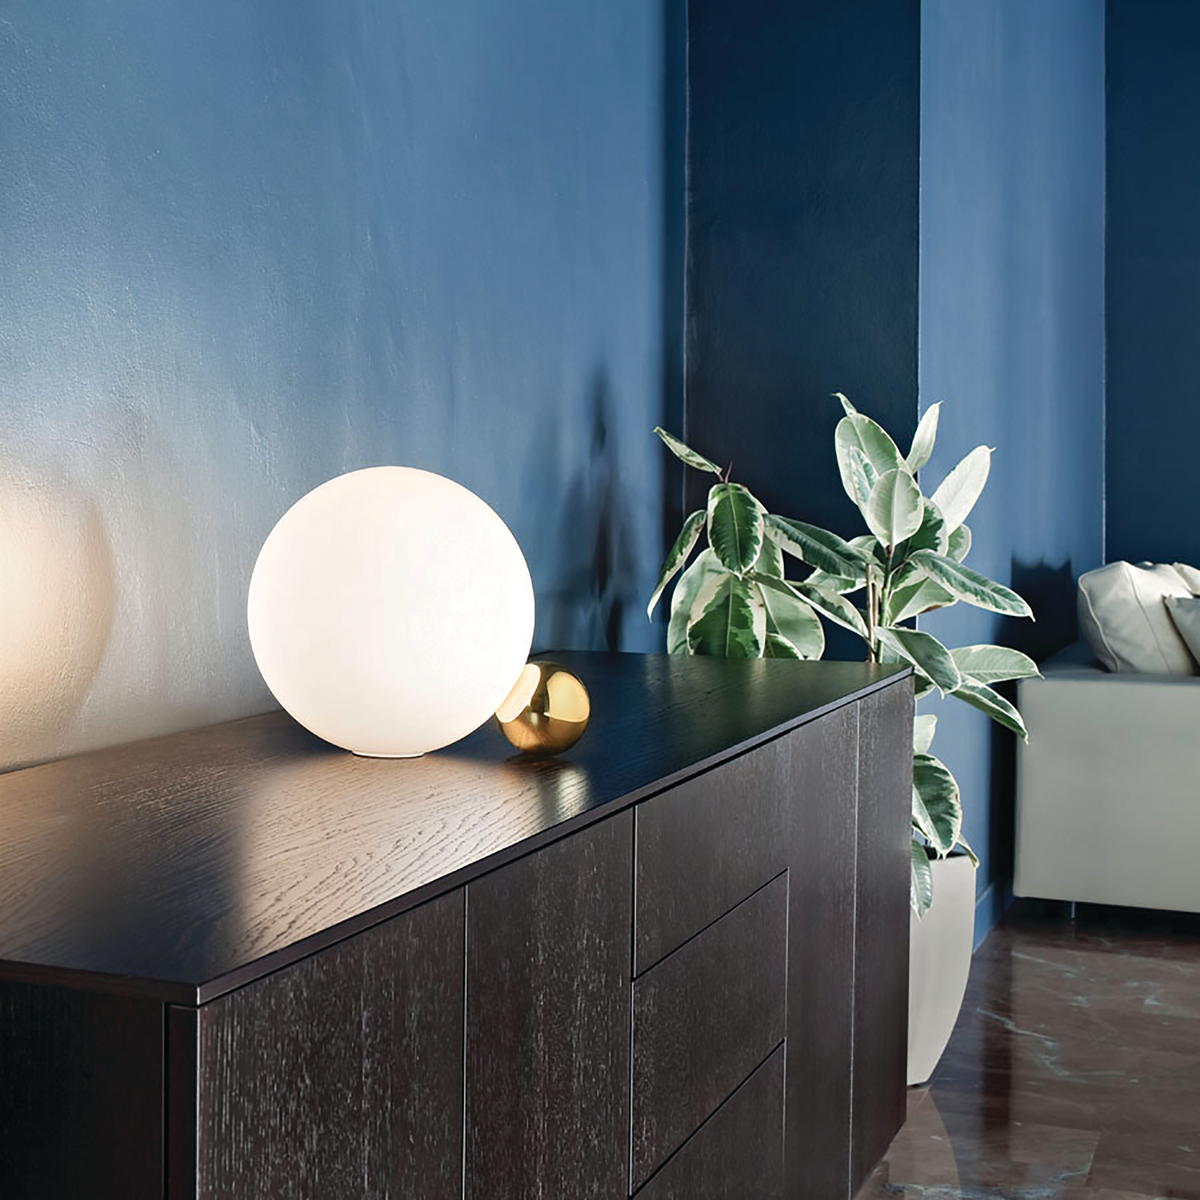 A warm, glowing table lamp accents the space.